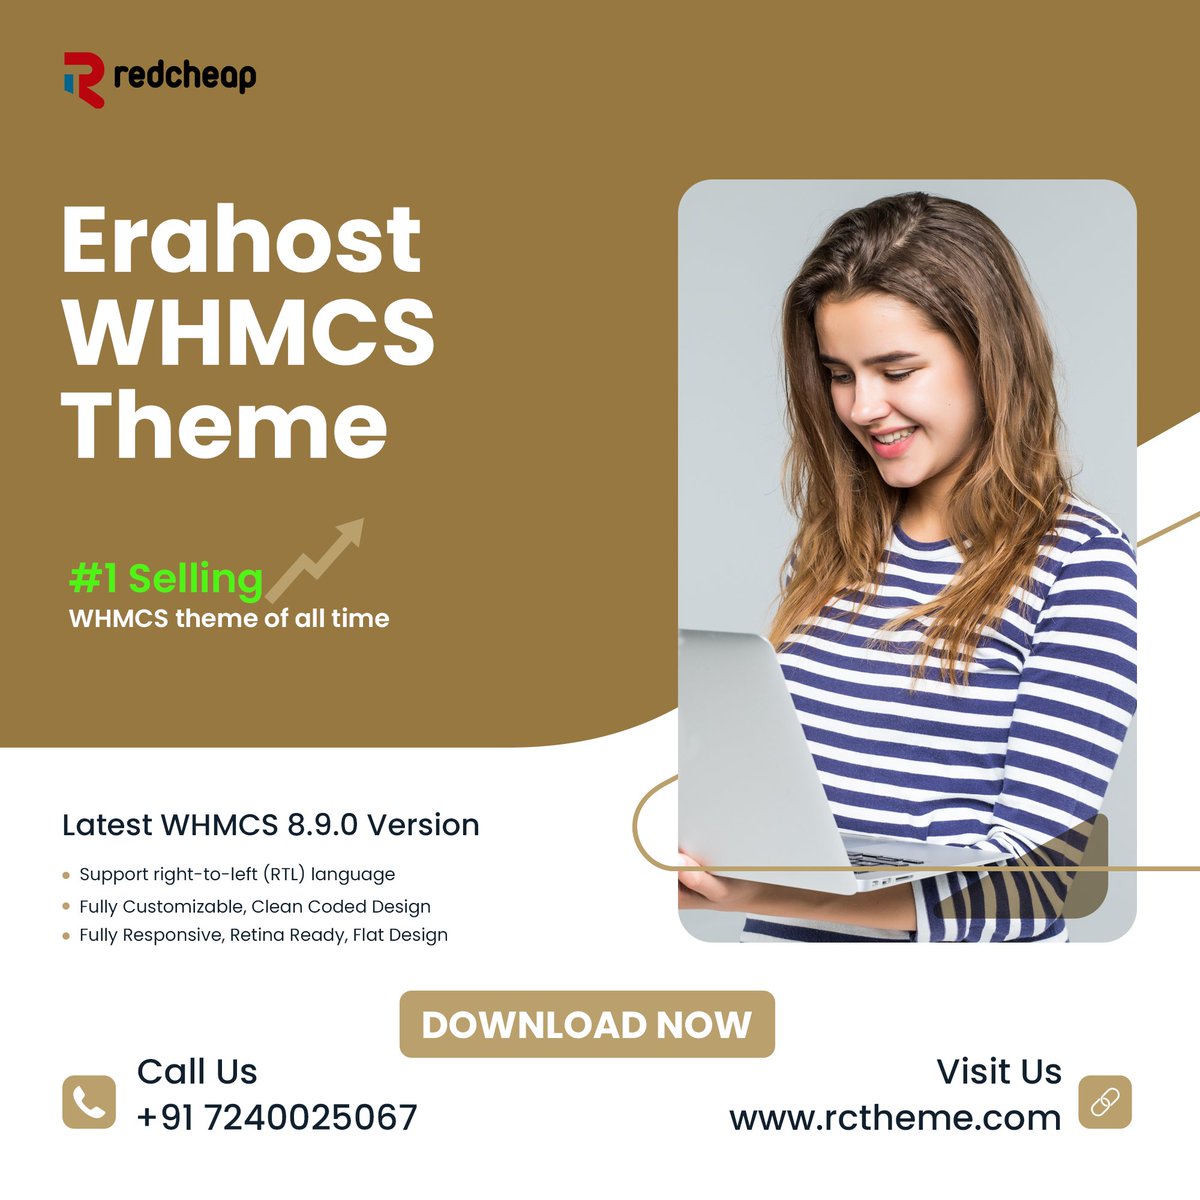 🚀 Join the thousands of satisfied users worldwide who've chosen Erahost WHMCS Theme - the #1 selling WHMCS theme of all time! 🌟 Plus, we've got you covered with support for right-to-left languages, ensuring a seamless experience for everyone. 🌍 #Erahost #WHMCS #RTL #WebHosting